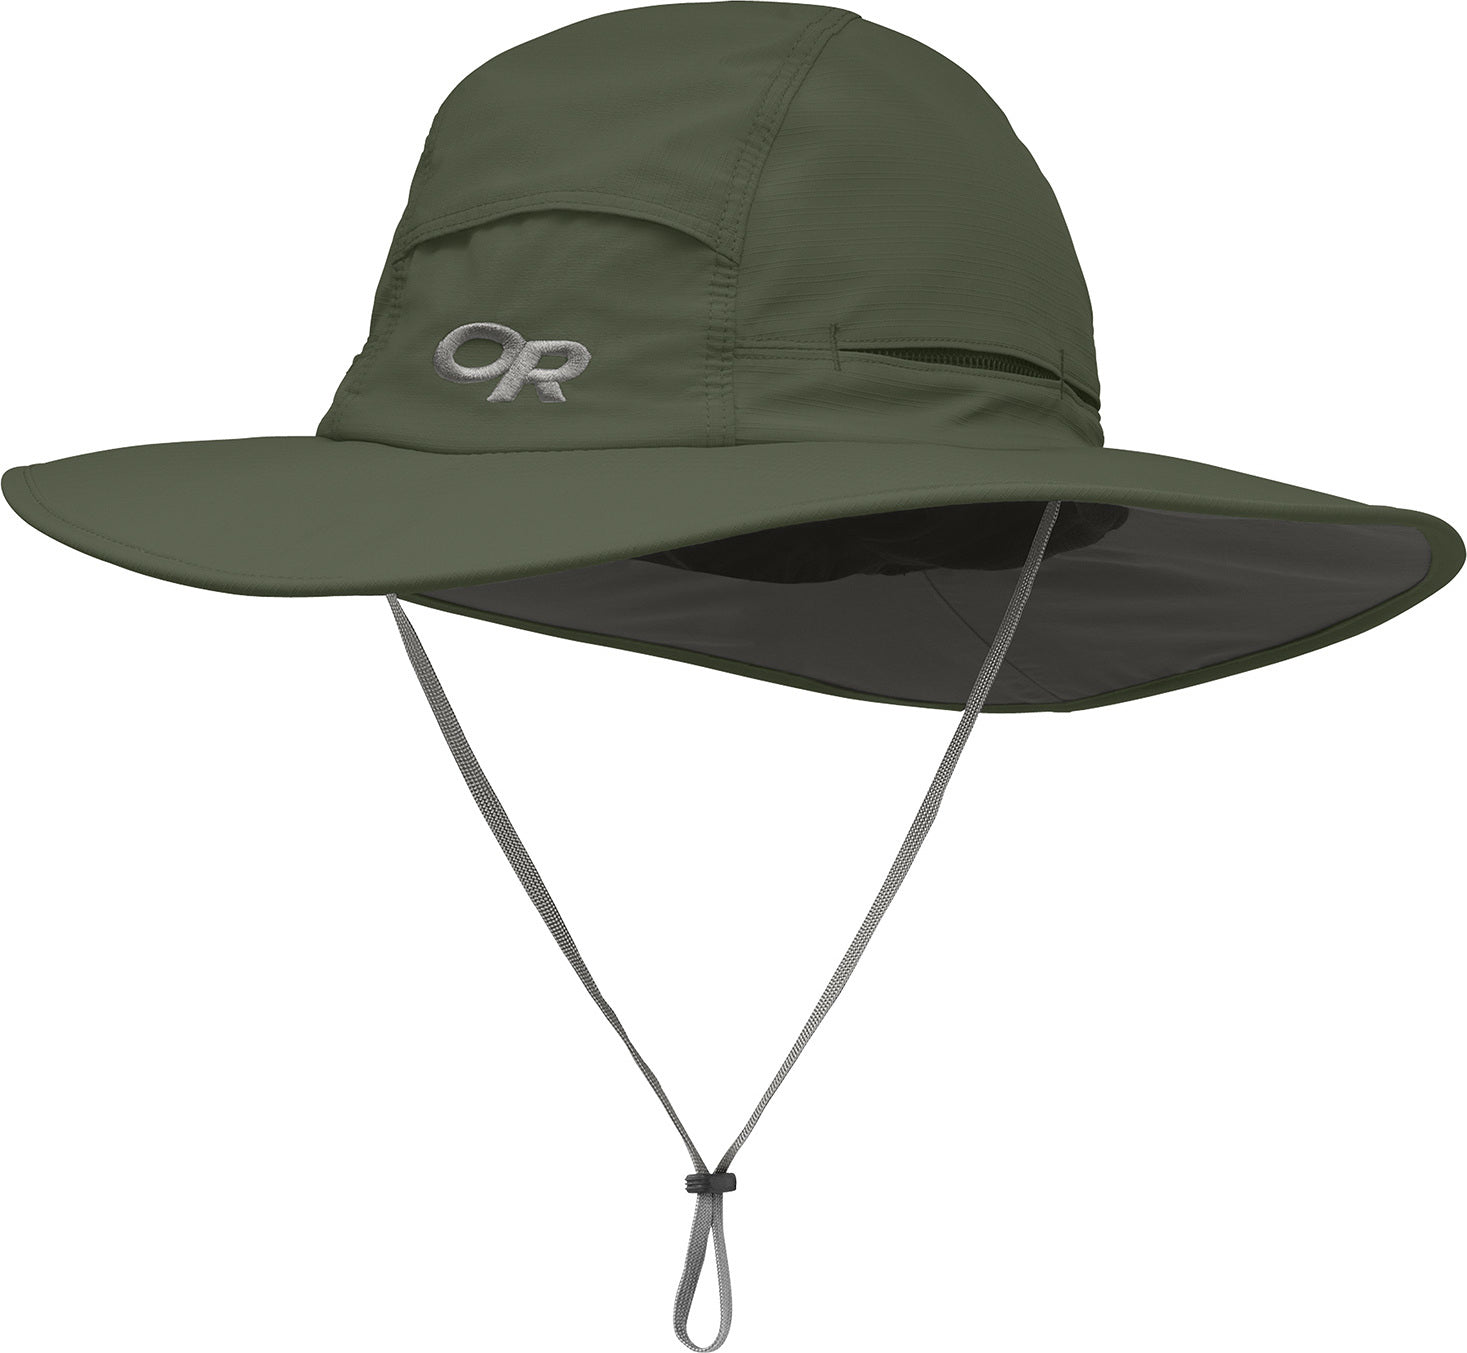 Outdoor Research Sombriolet Sun Hat - Fatigue, M